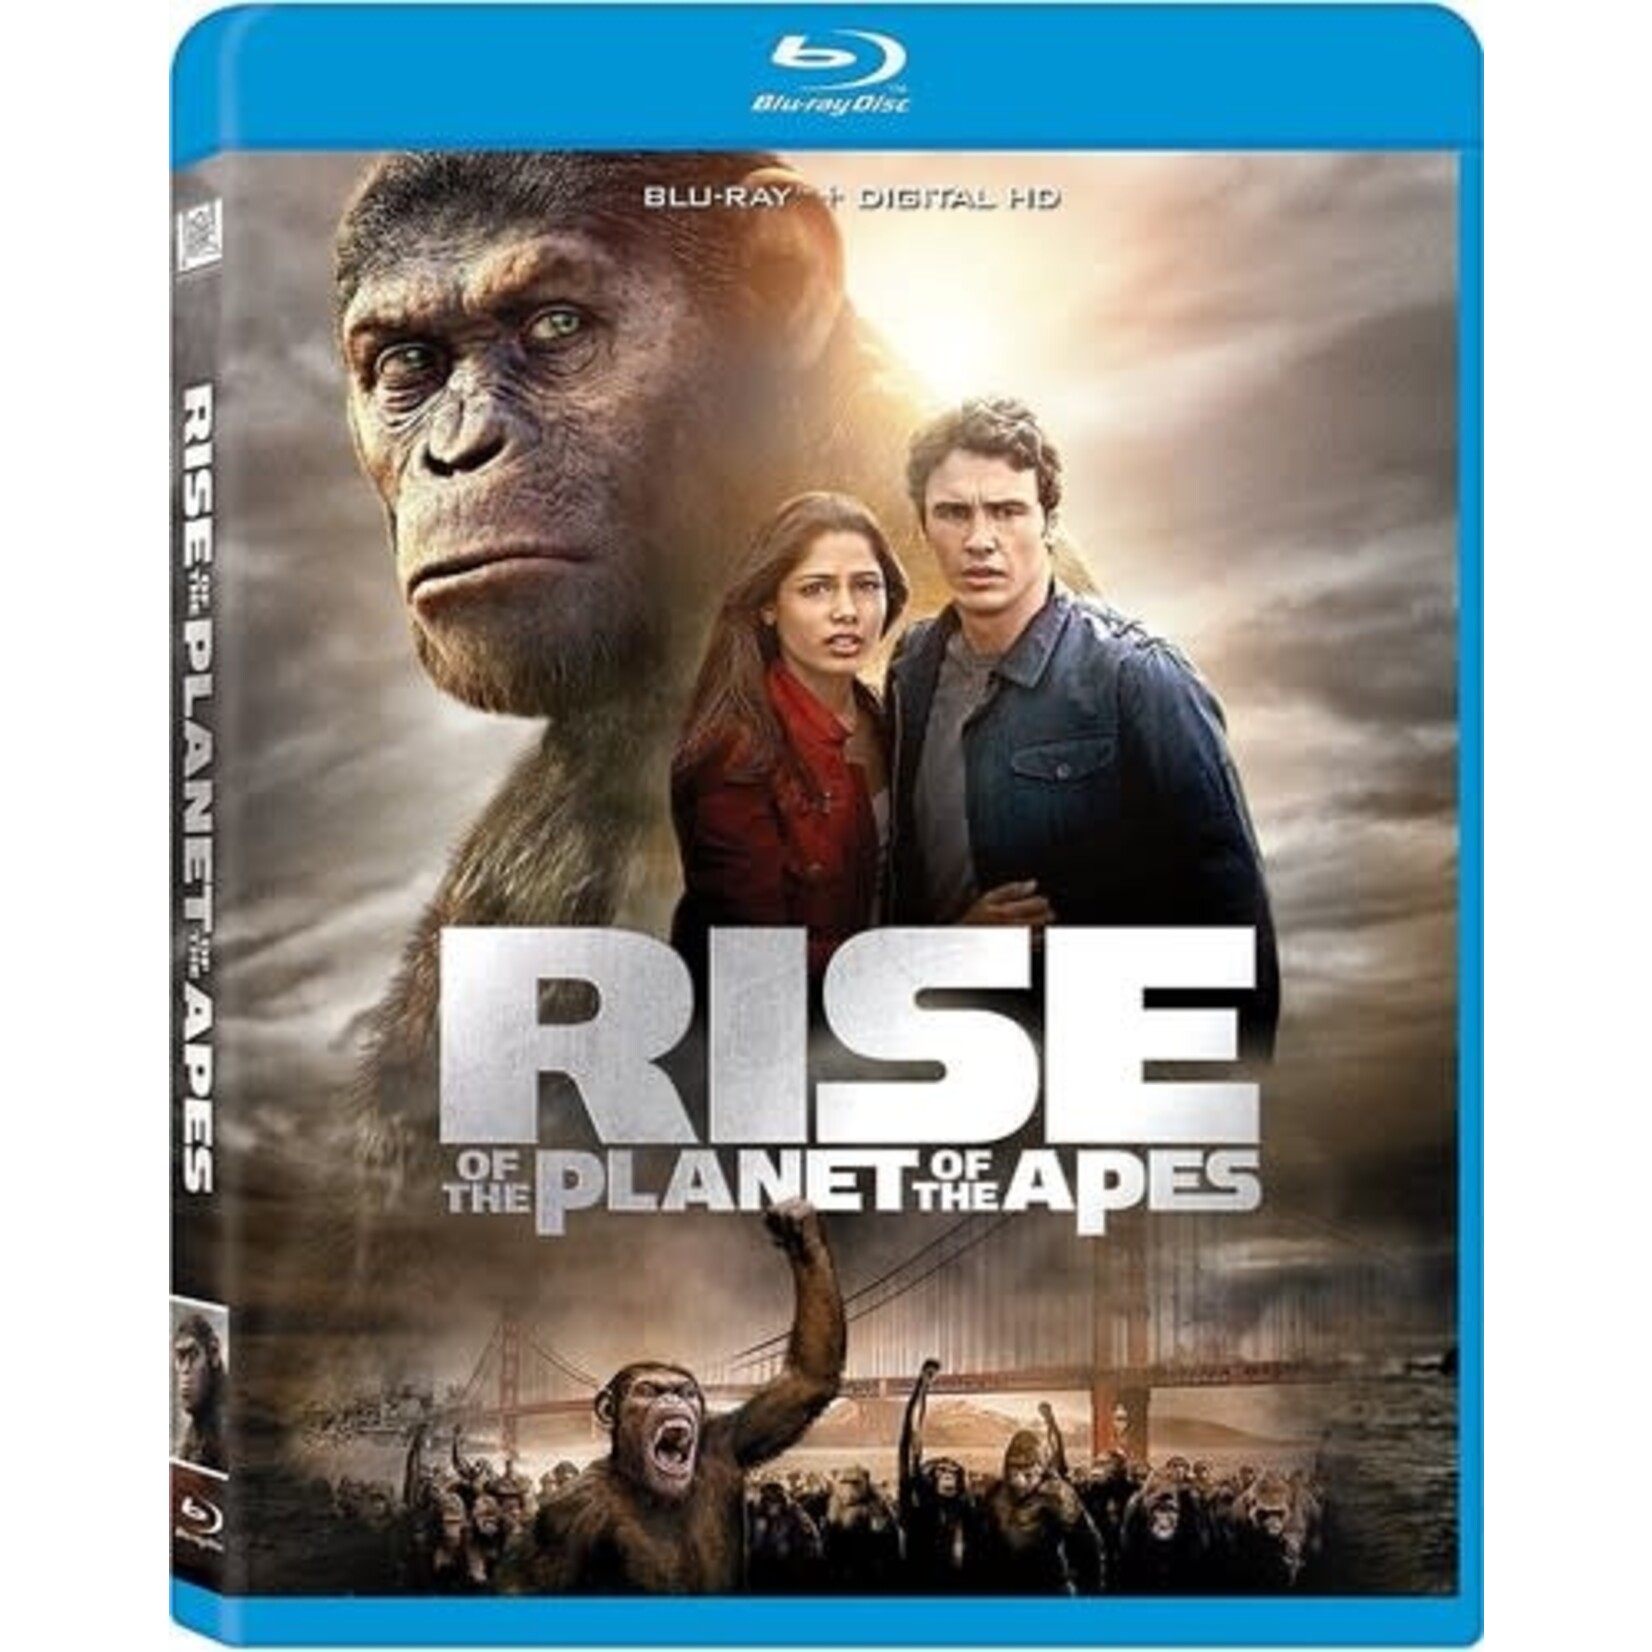 Planet Of The Apes (Reboot) 1: Rise Of The Planet Of The Apes (2011) [USED BRD]